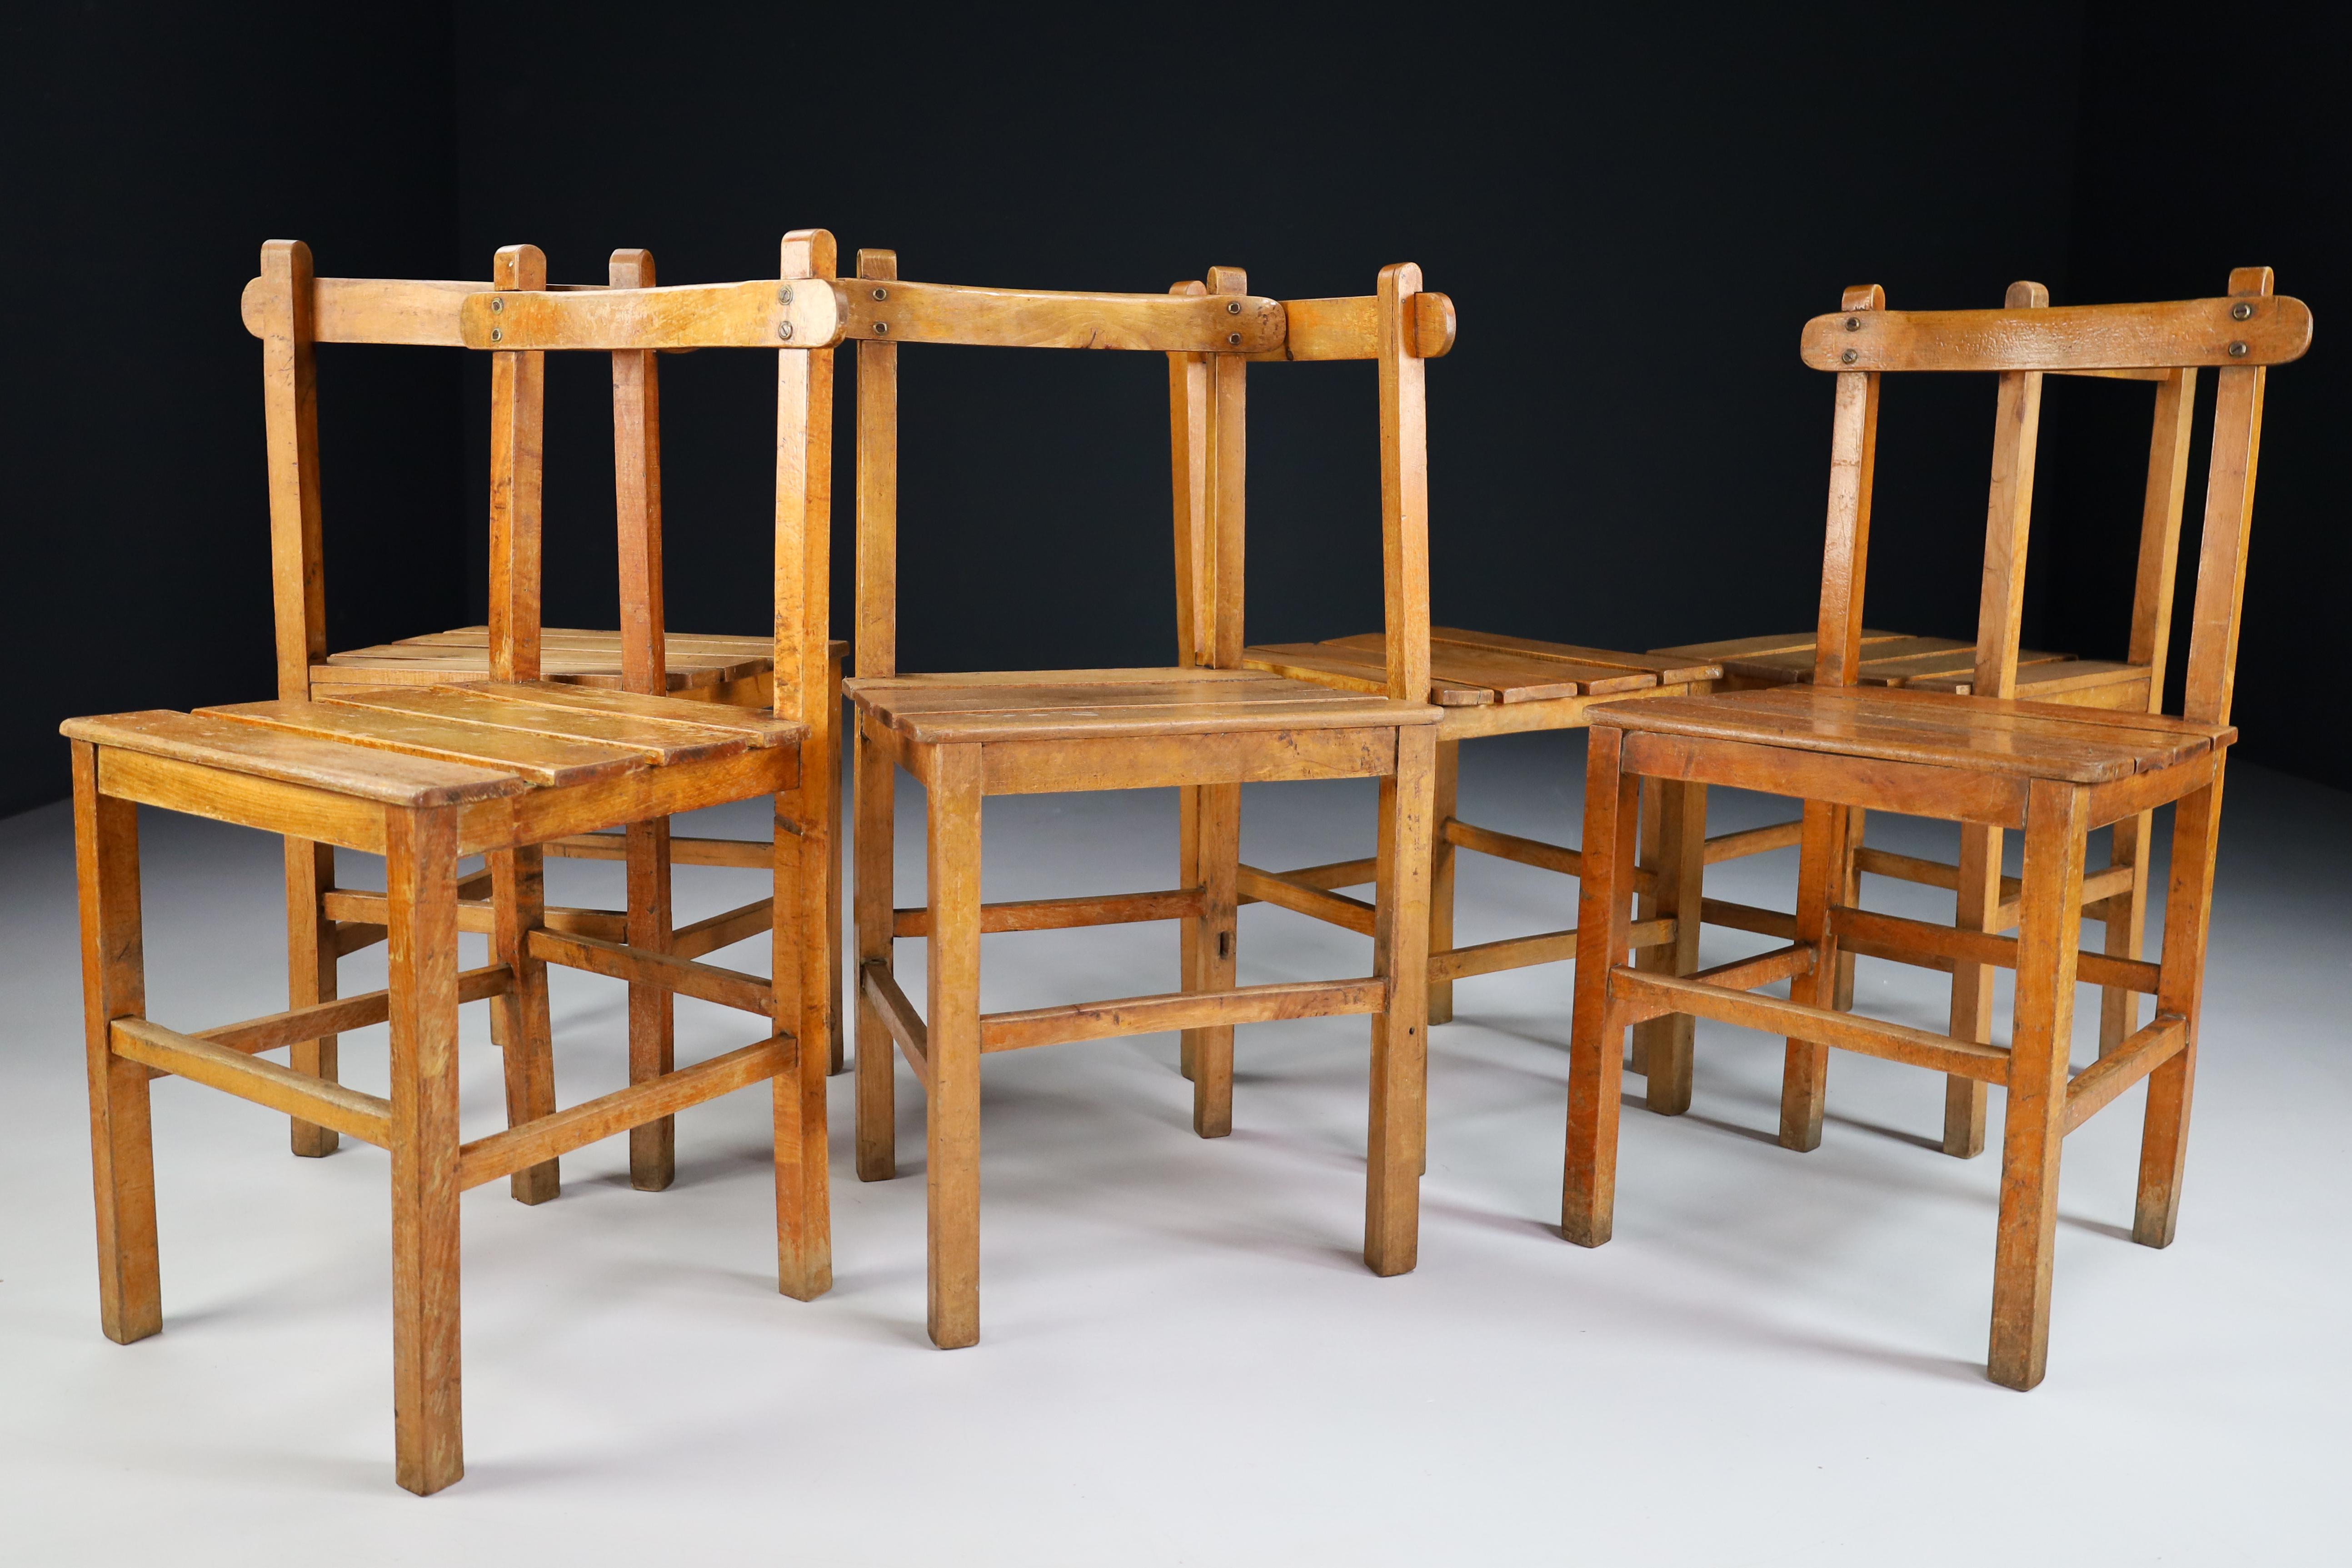 Set of six primitive chairs in solid beechwood, France 1950s. These chairs are in original and untouched condition, with amazing original patina. These chairs would make an eye-catching addition to any interior such as dining room, family room,